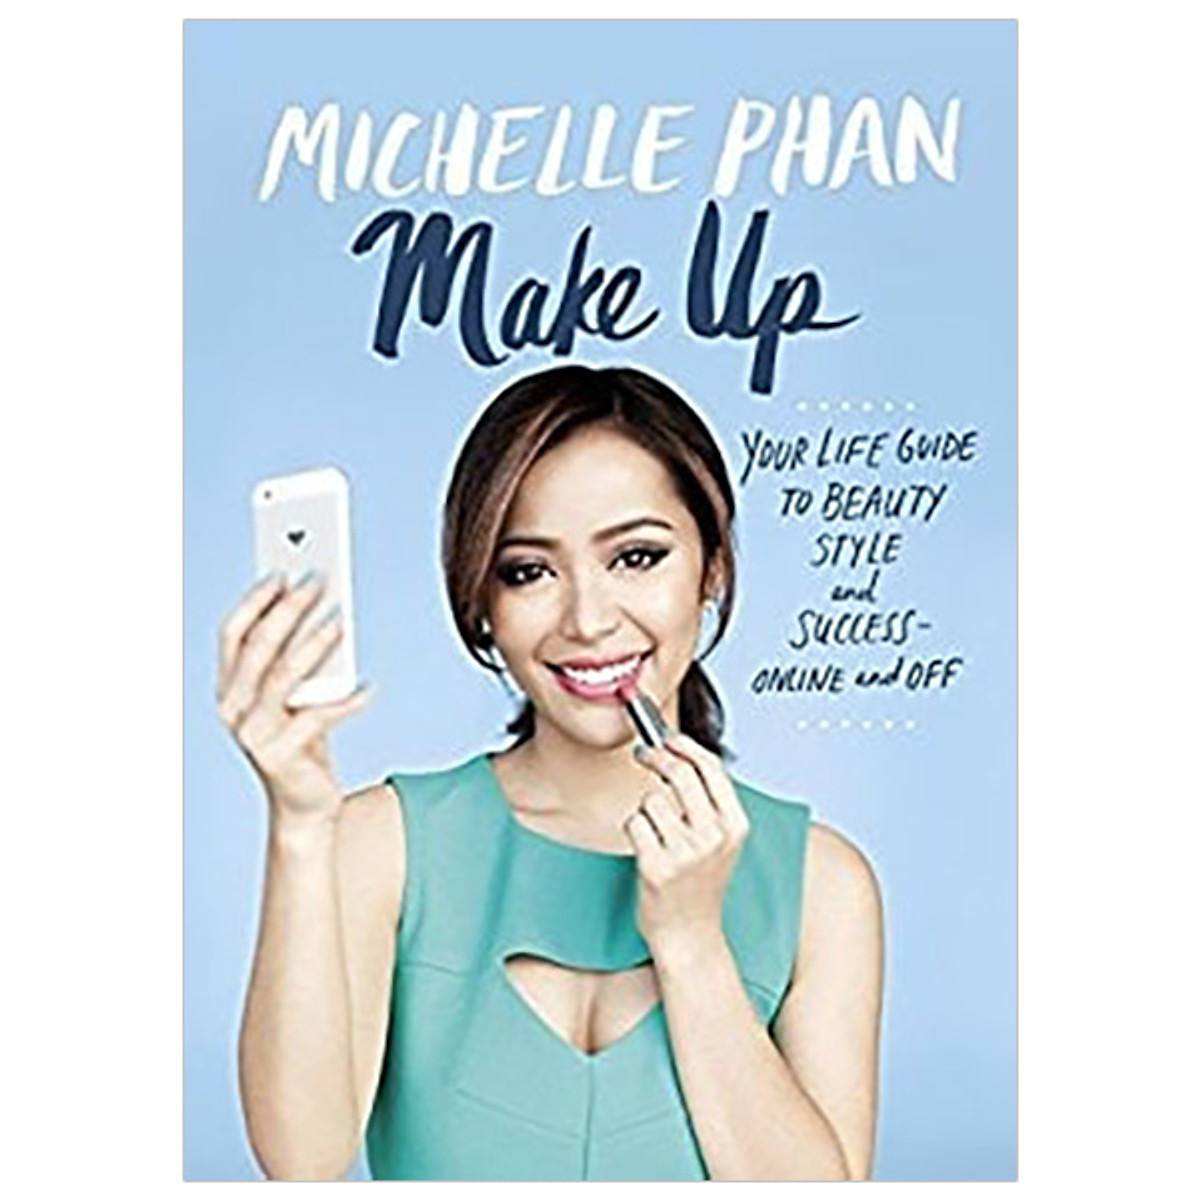 Make Up Your Life: Your Guide to Beauty, Style, and Success - Online and off